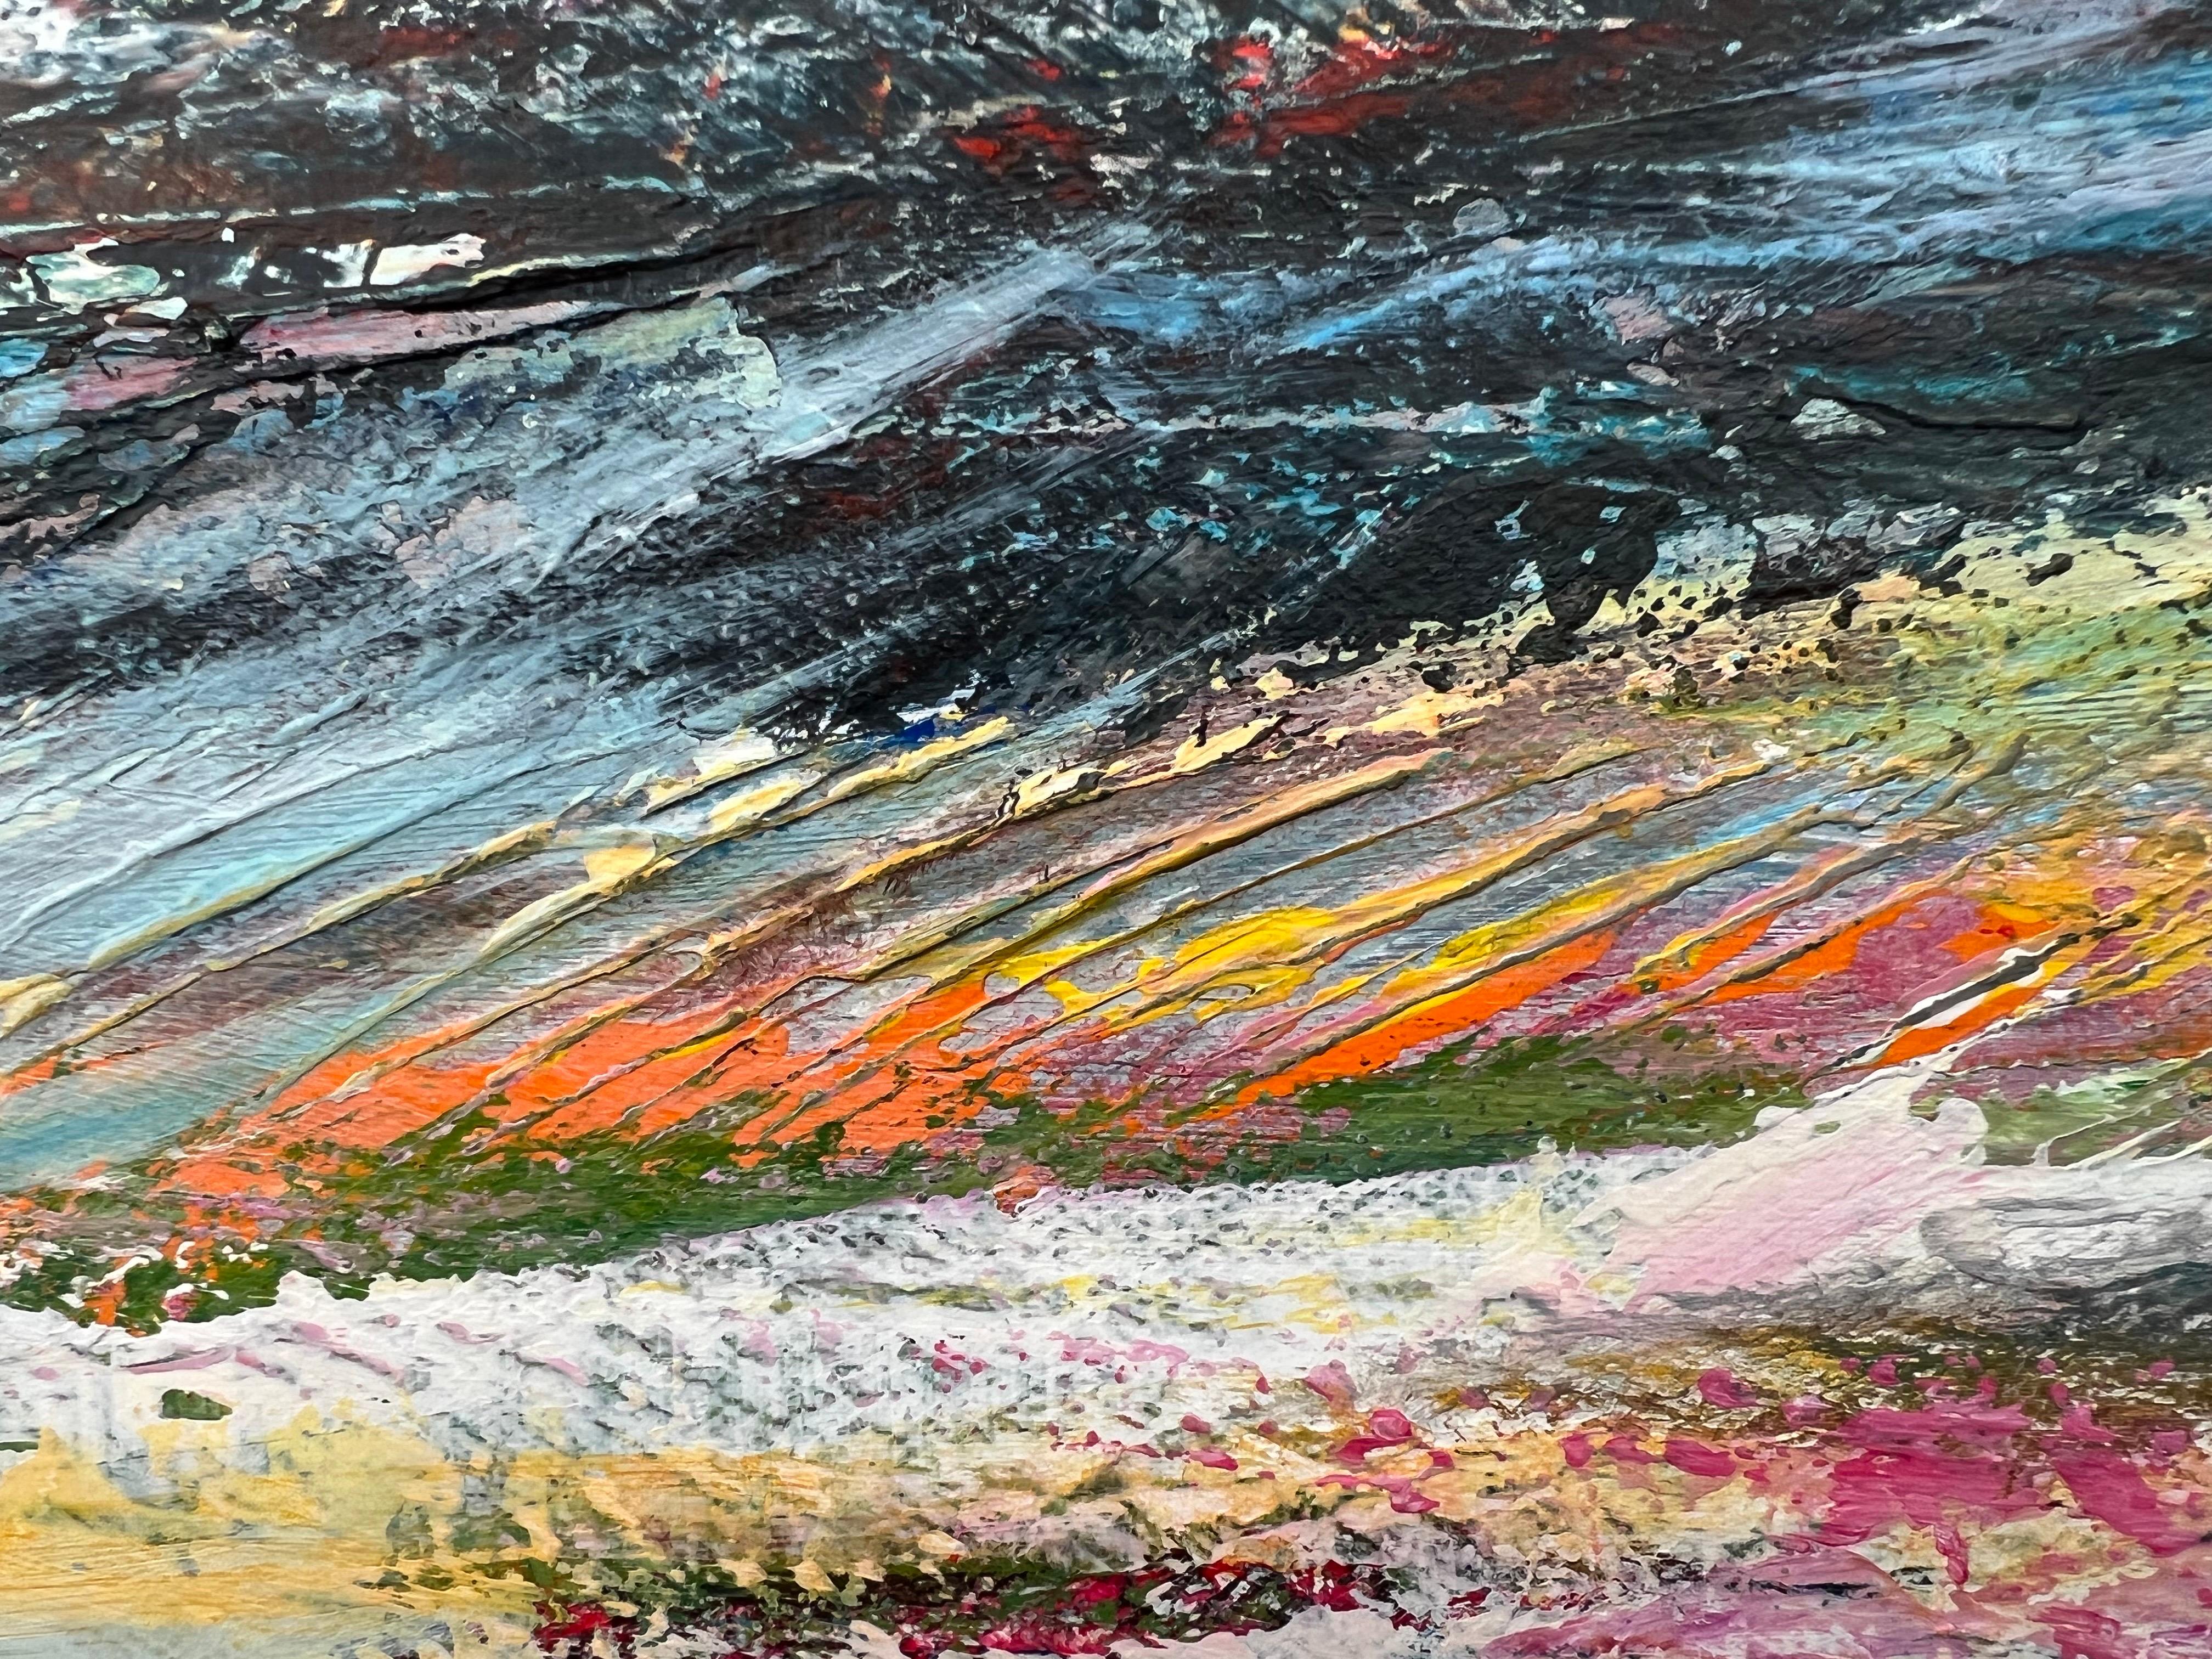 Colourful Expressive Abstract Landscape Painting by Contemporary British Artist For Sale 12